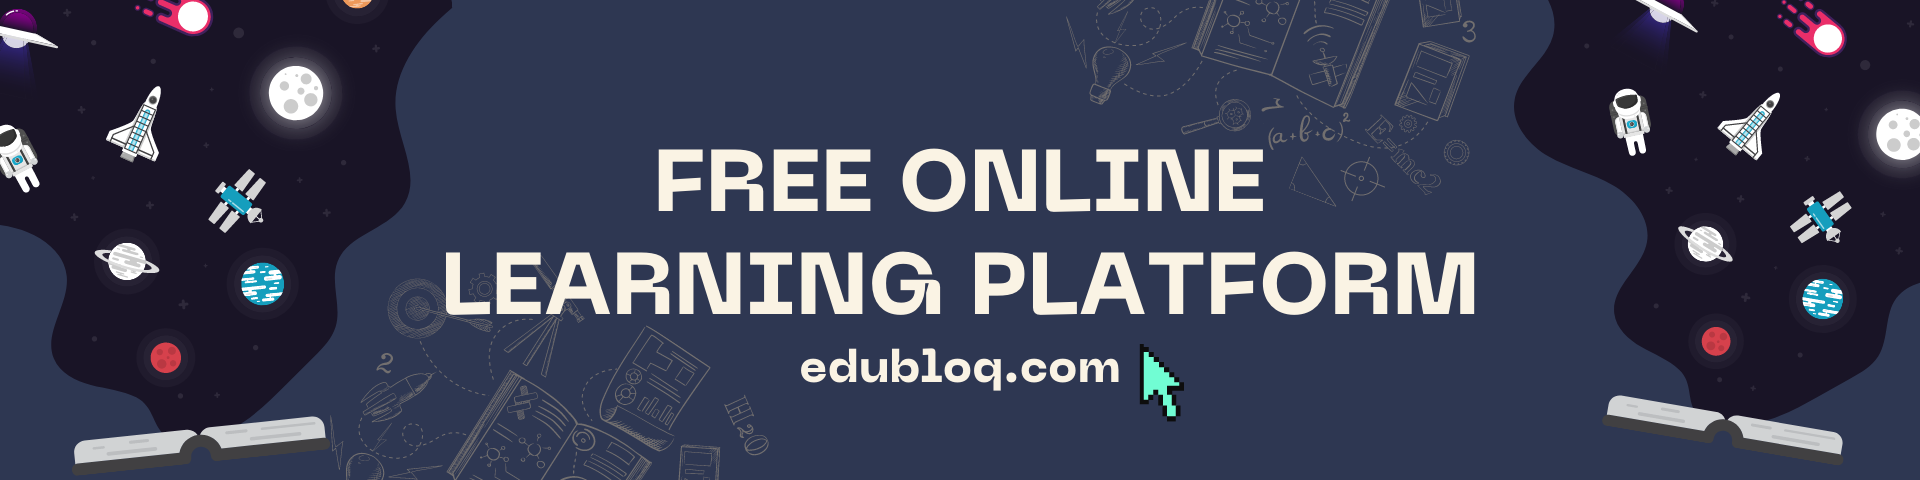 Free online learning platform and educational resources